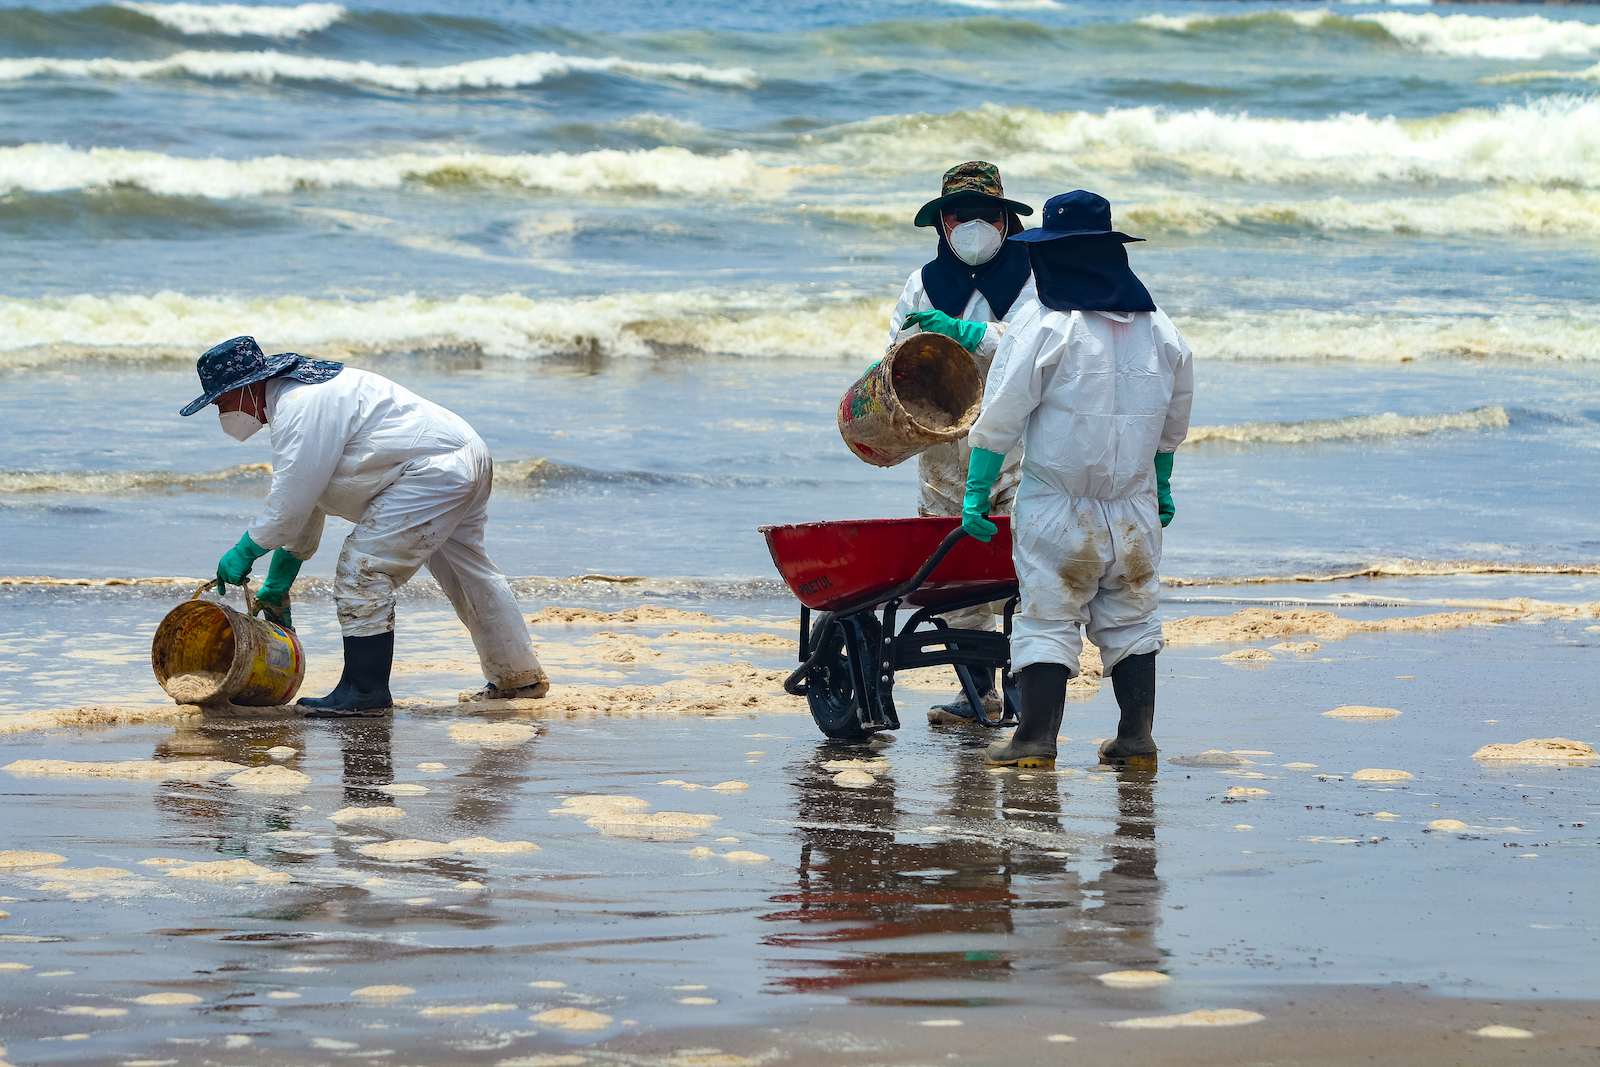 Repsol employees work filling buckets with contaminated sand during the cleanup in the shore of Cavero Beach on January 20, 2022 in Ventanilla, Peru.